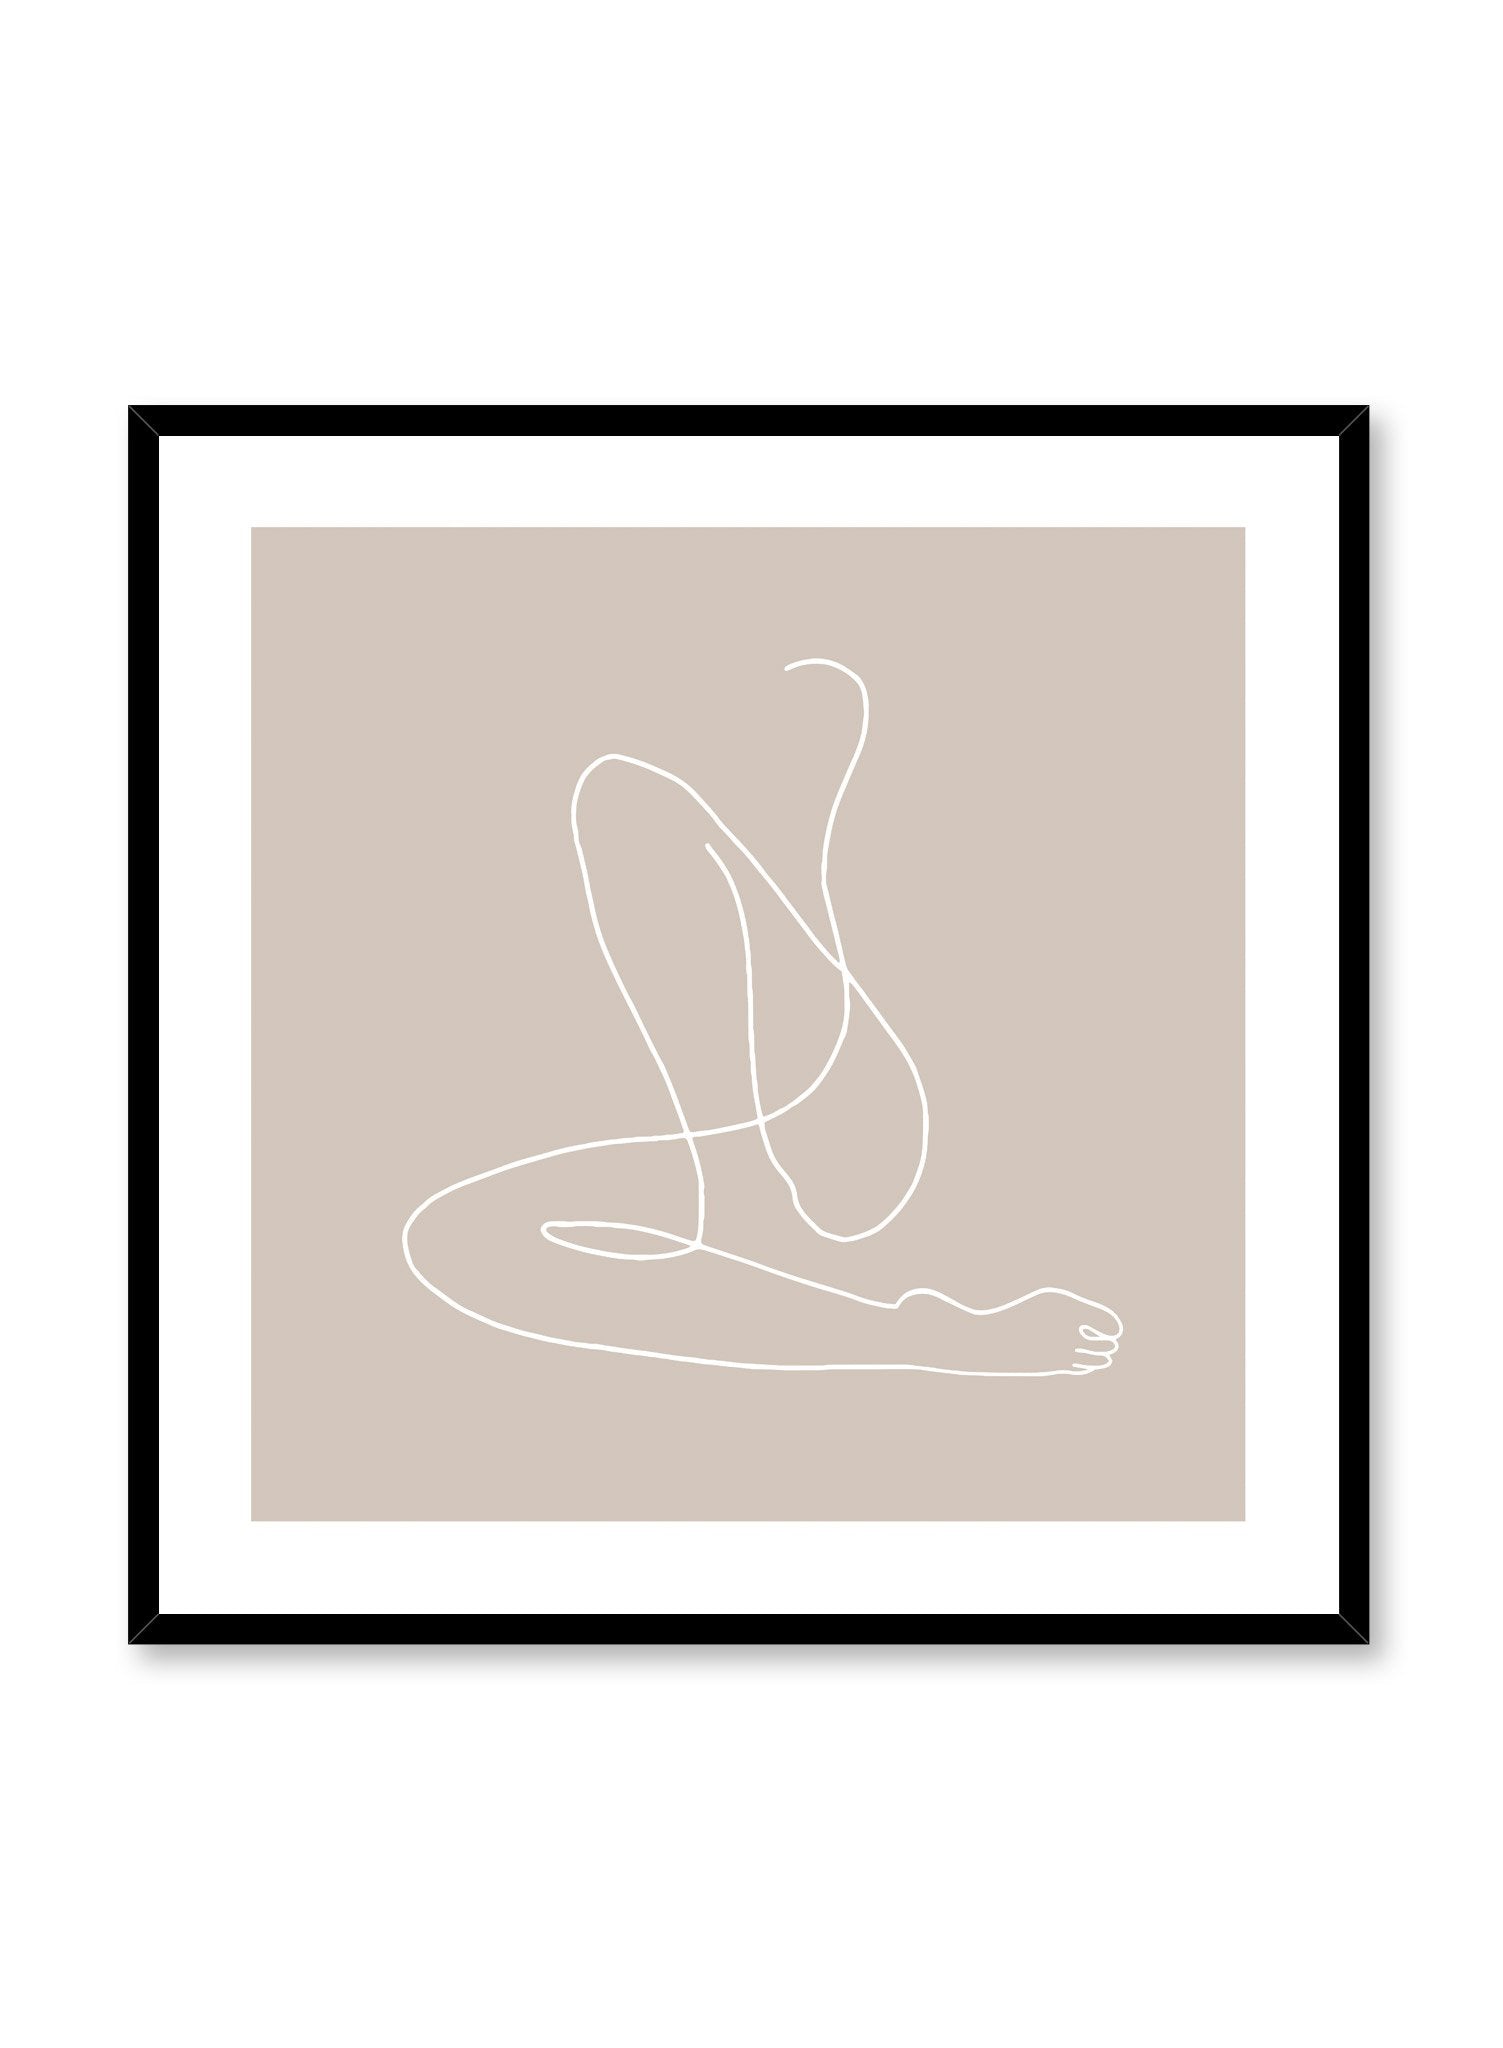 Modern minimalist square format poster by Opposite Wall with abstract illustration of Flow with beige background